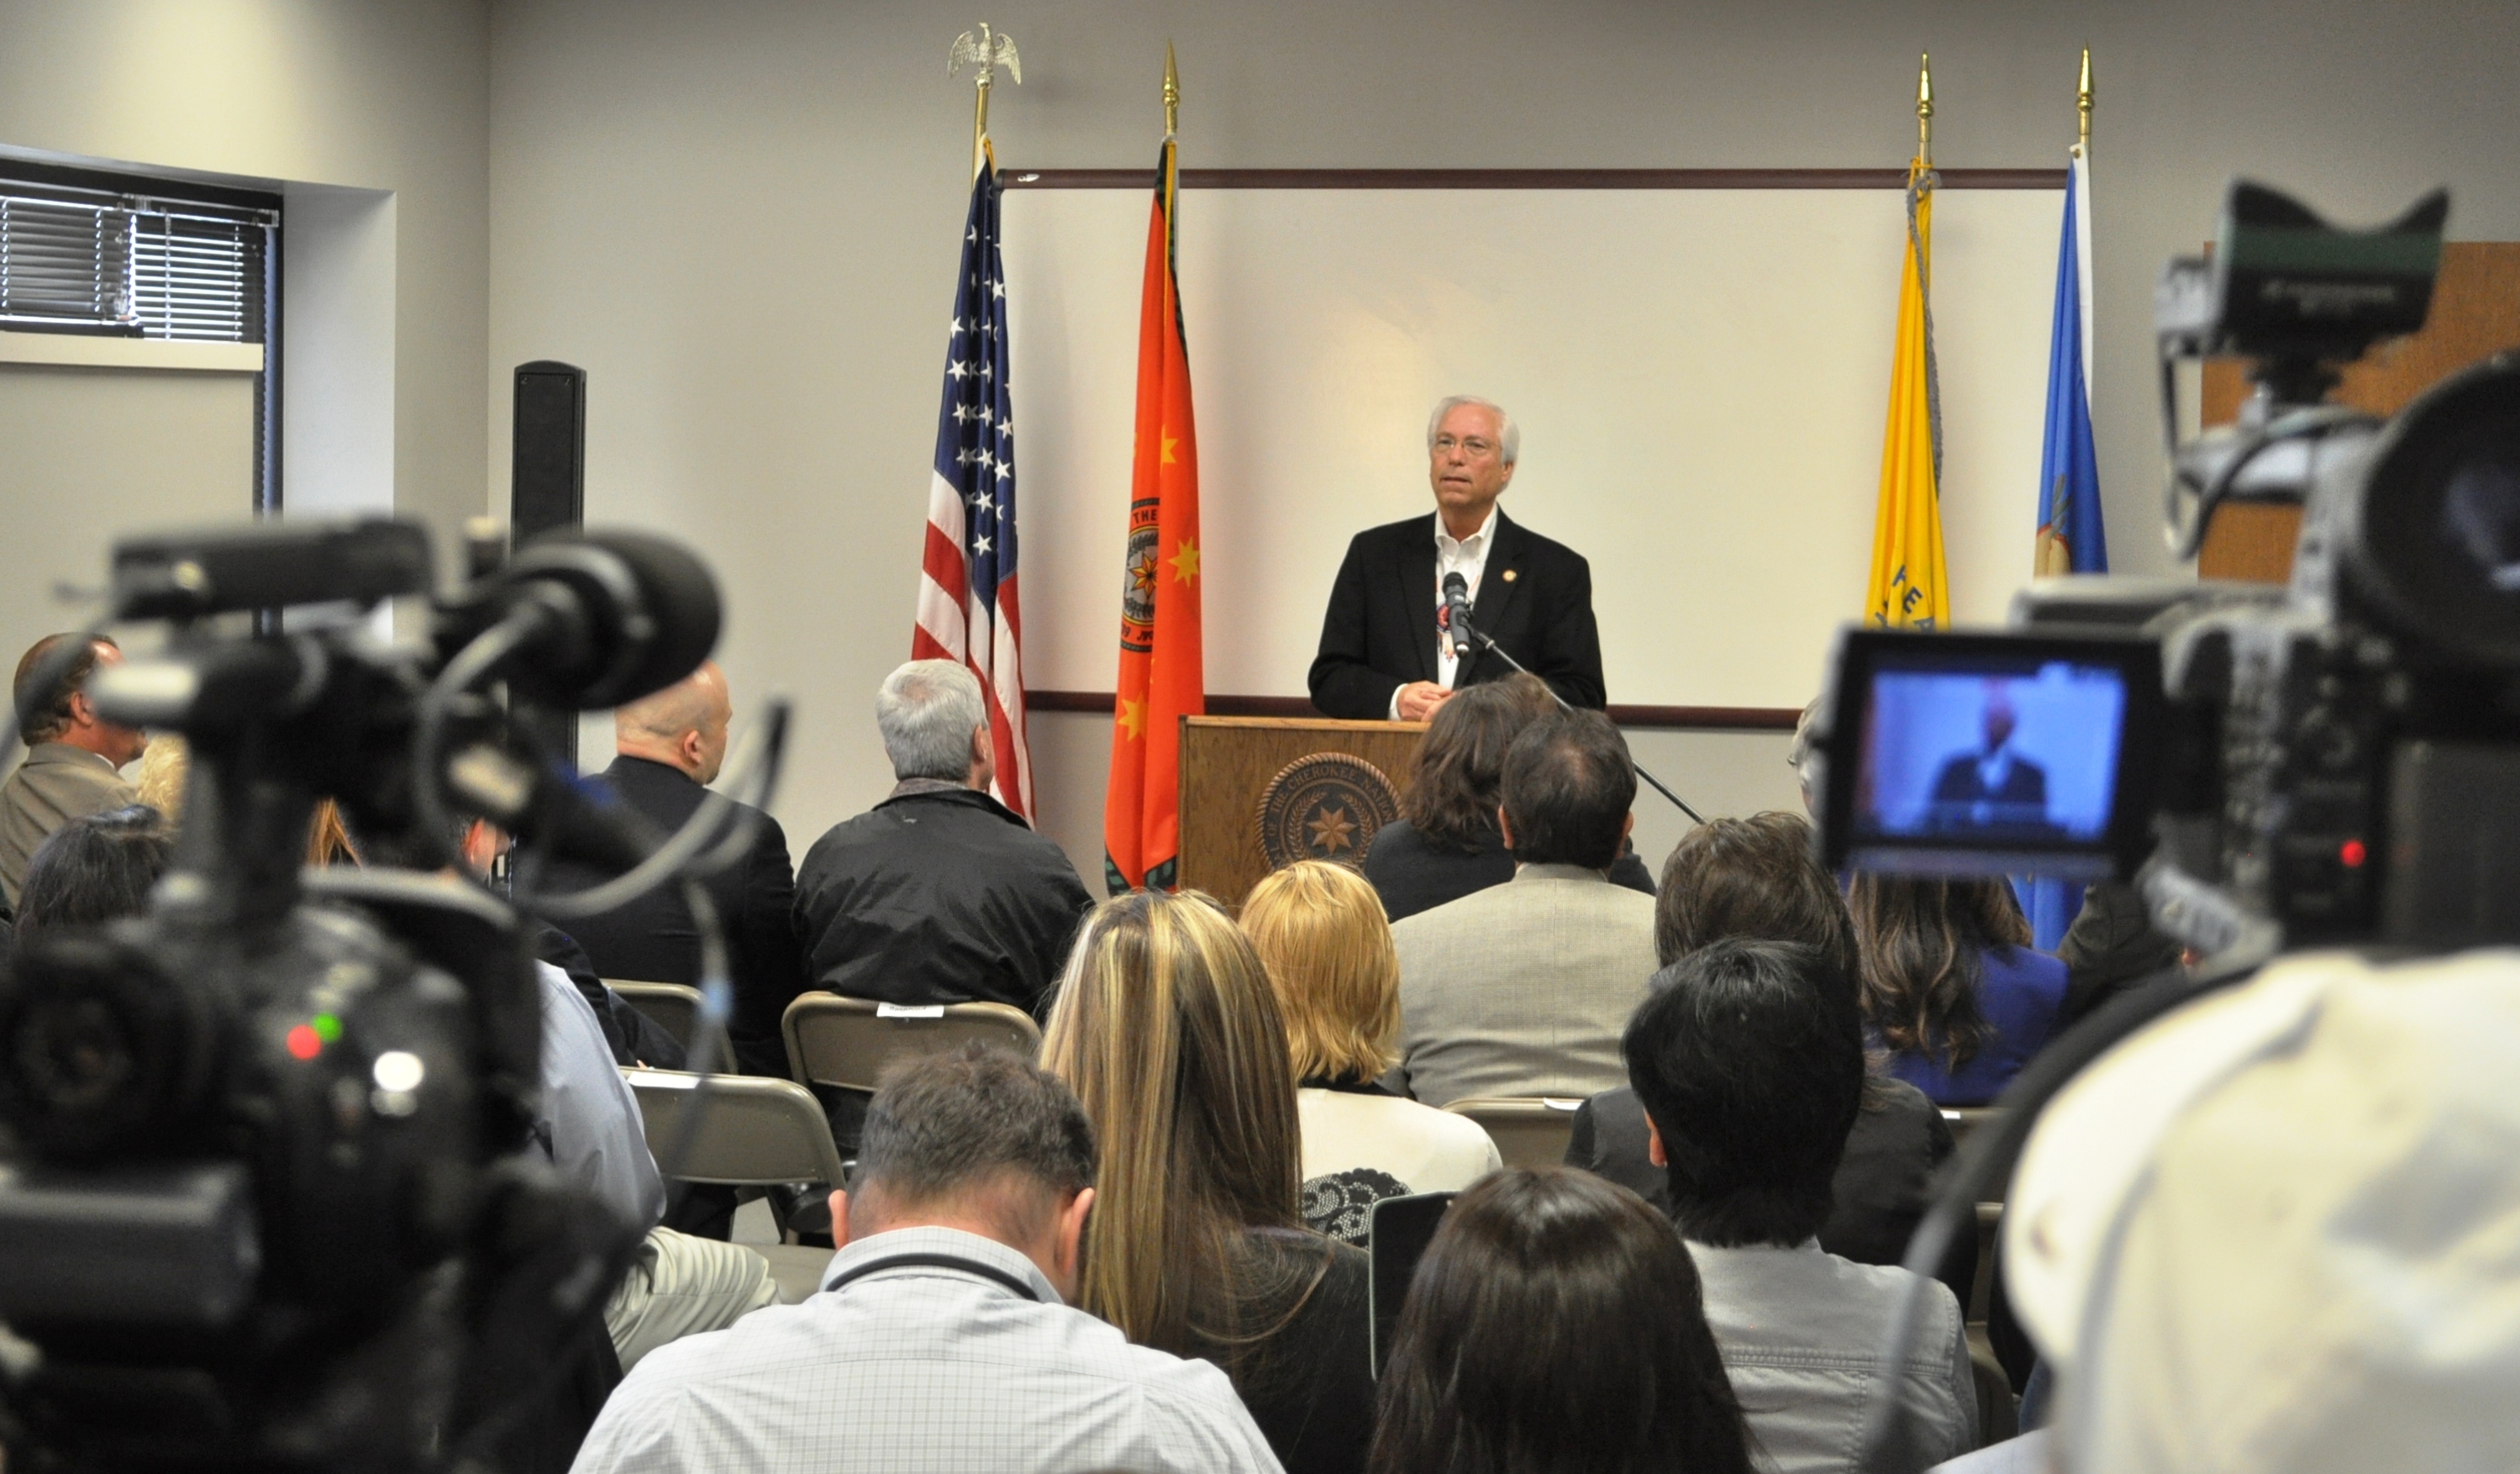 Cherokee Nation Principal Chief Bill John Baker announces the joint venture with Indian Health Service, which will allow the tribe to begin construction on a second facility at the W.W. Hastings Hospital medical campus.